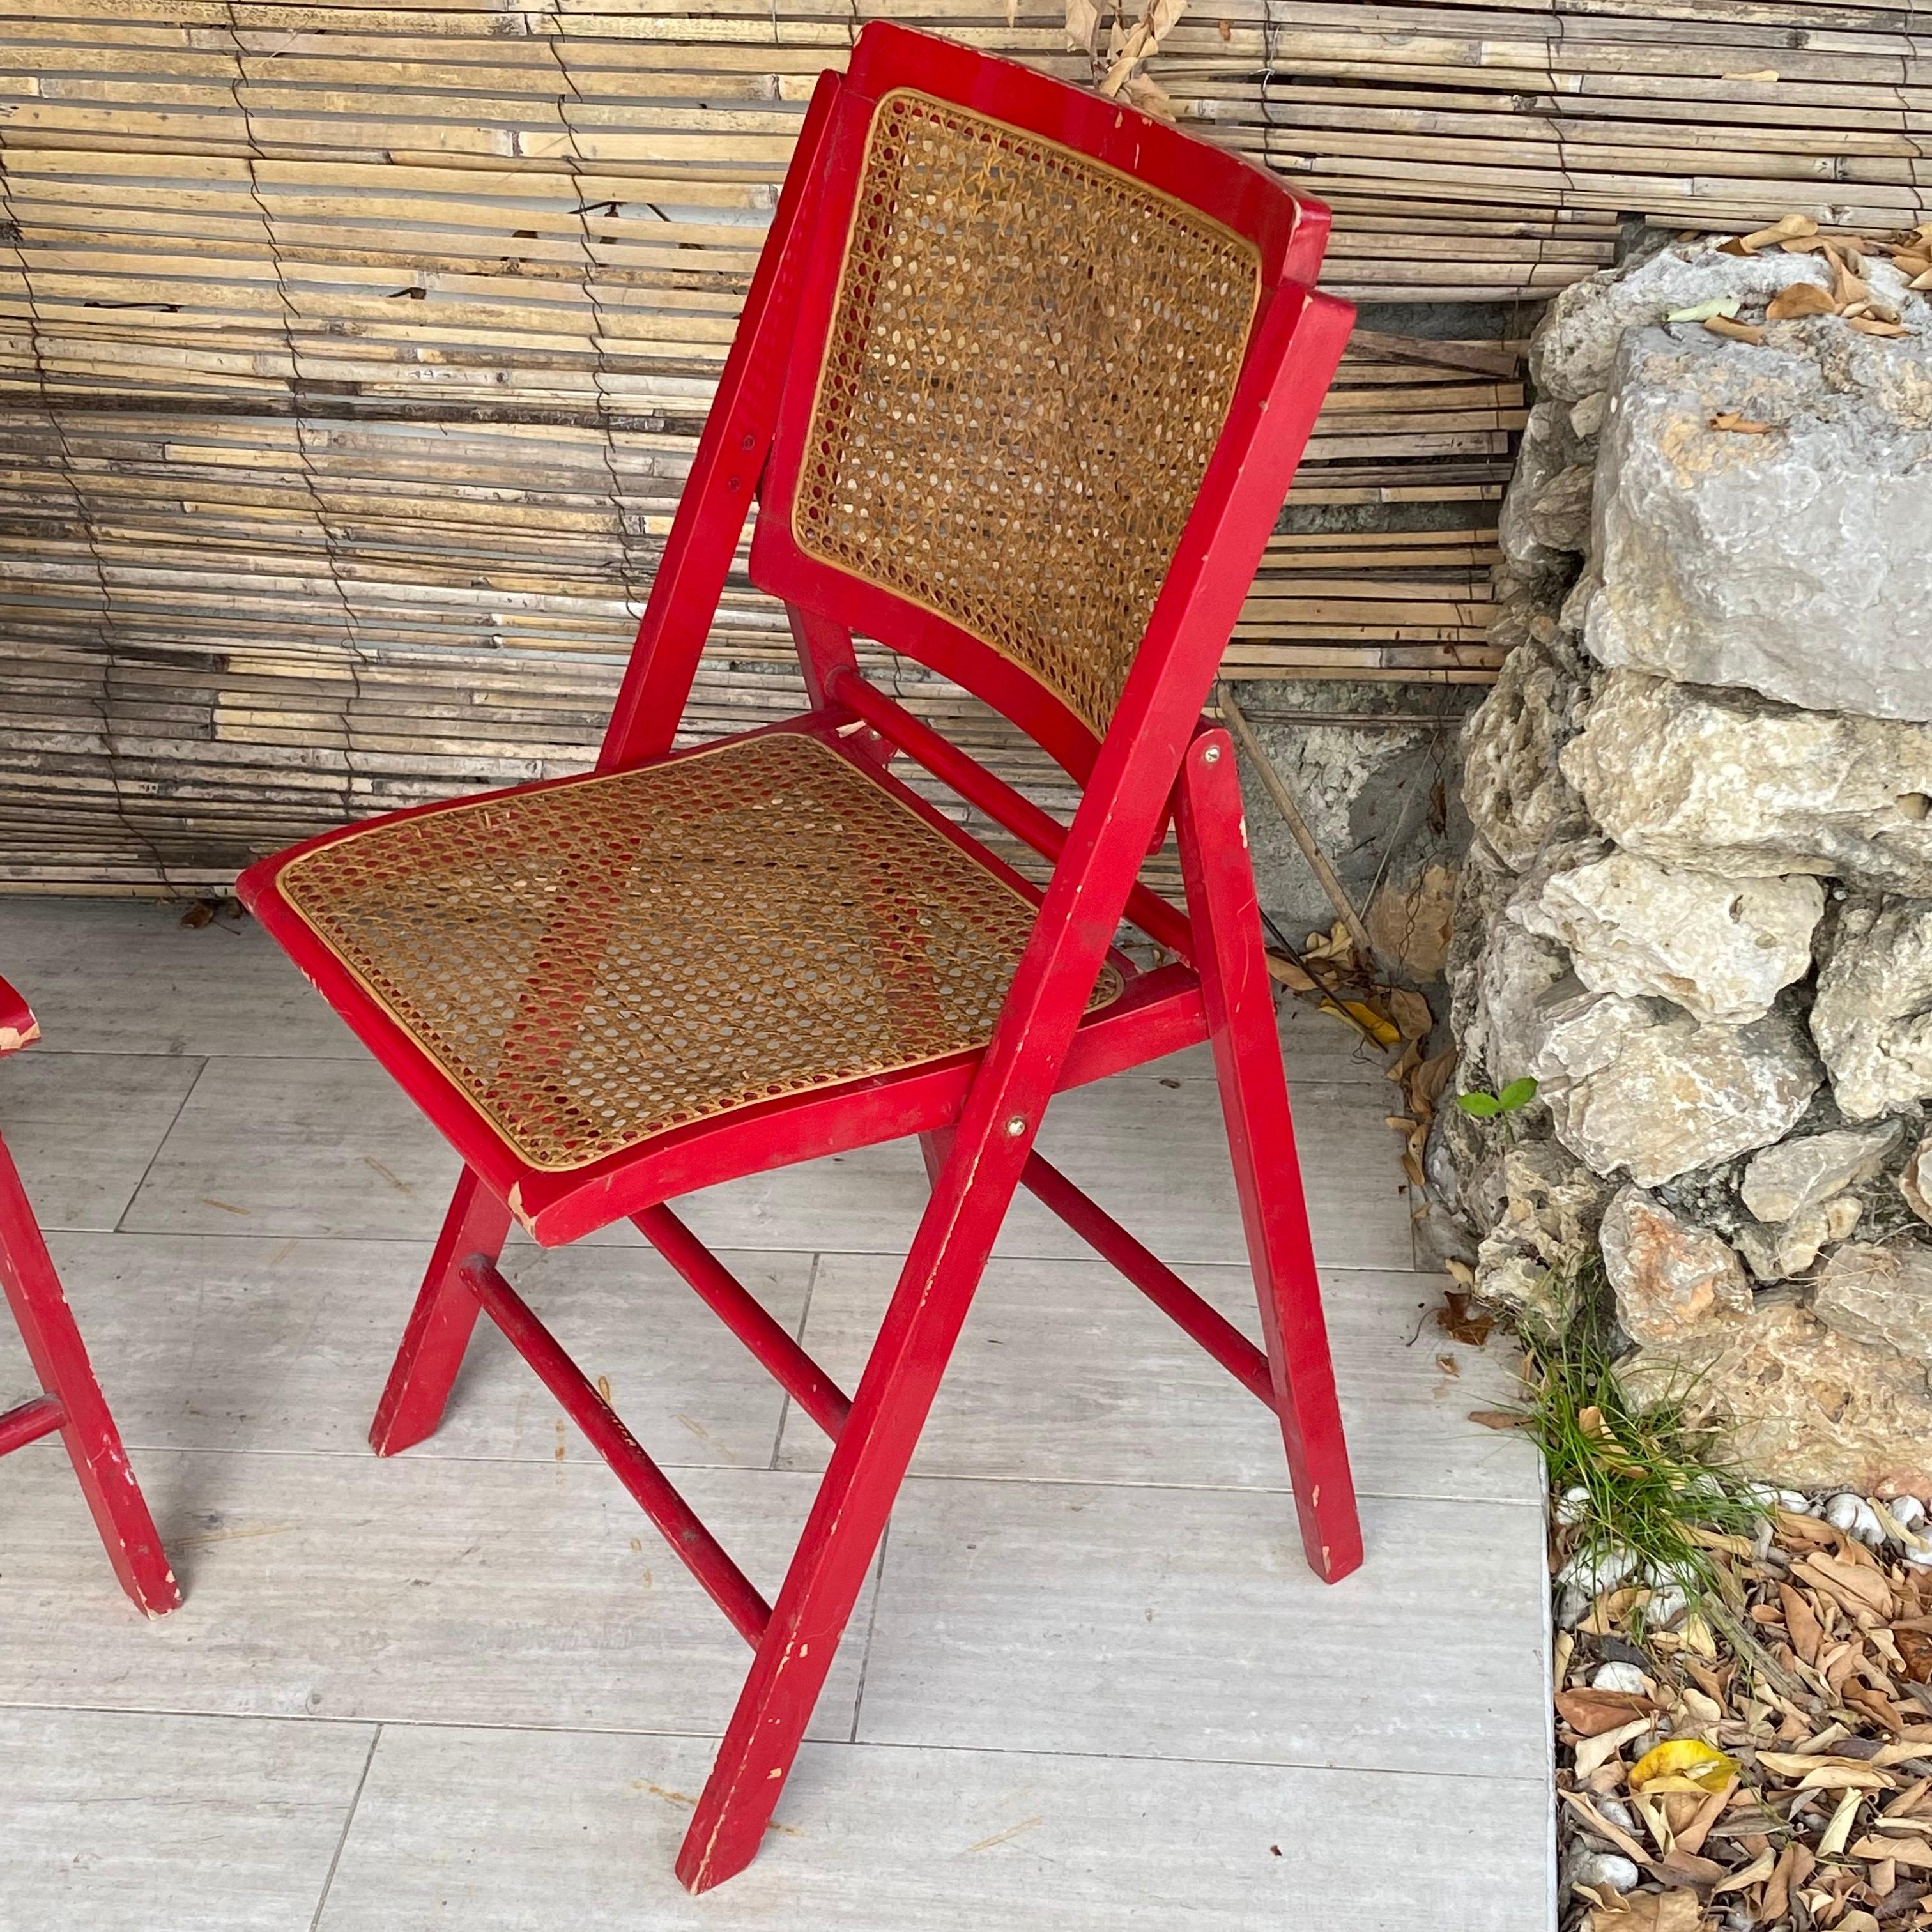 Mid-Century Modern Cane Folding Chairs Set of 2, France 1970, Red Color